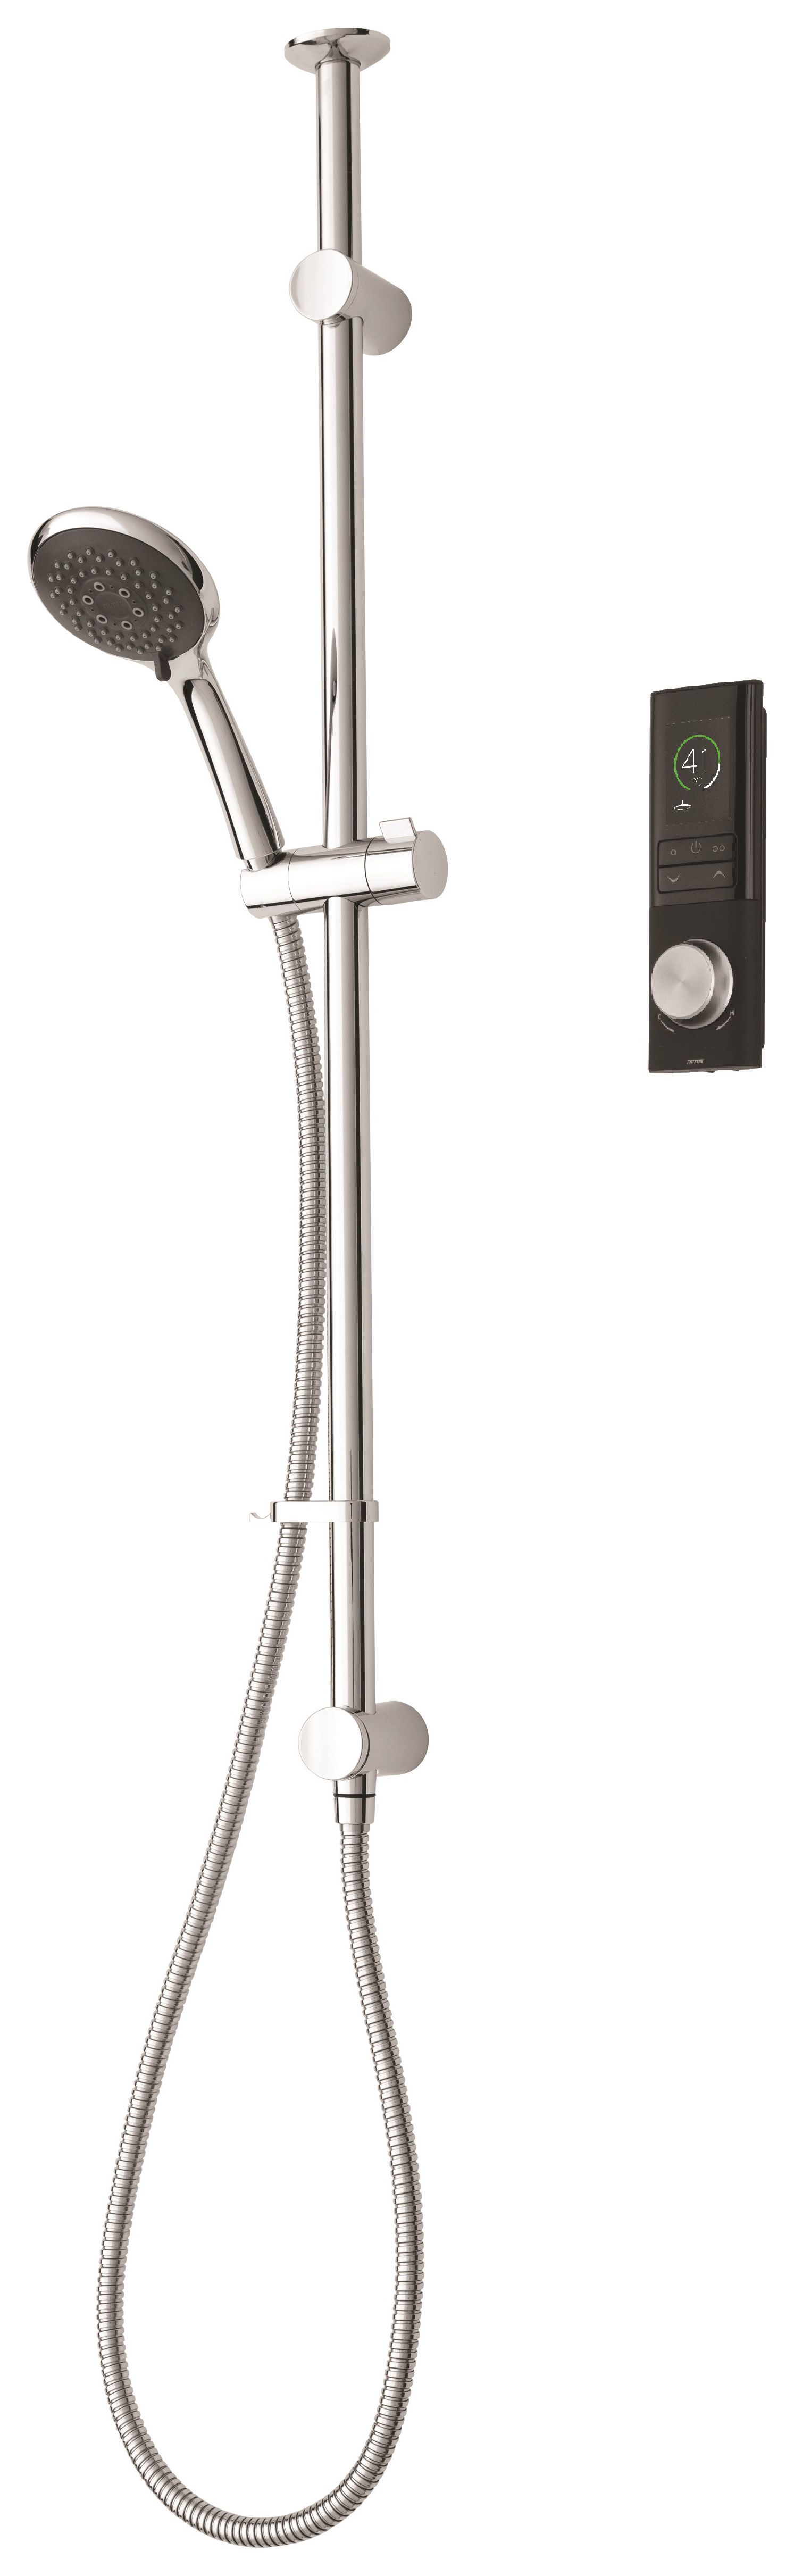 Image of Triton Home Digital Mixer Shower with Riser Rail - Pumped